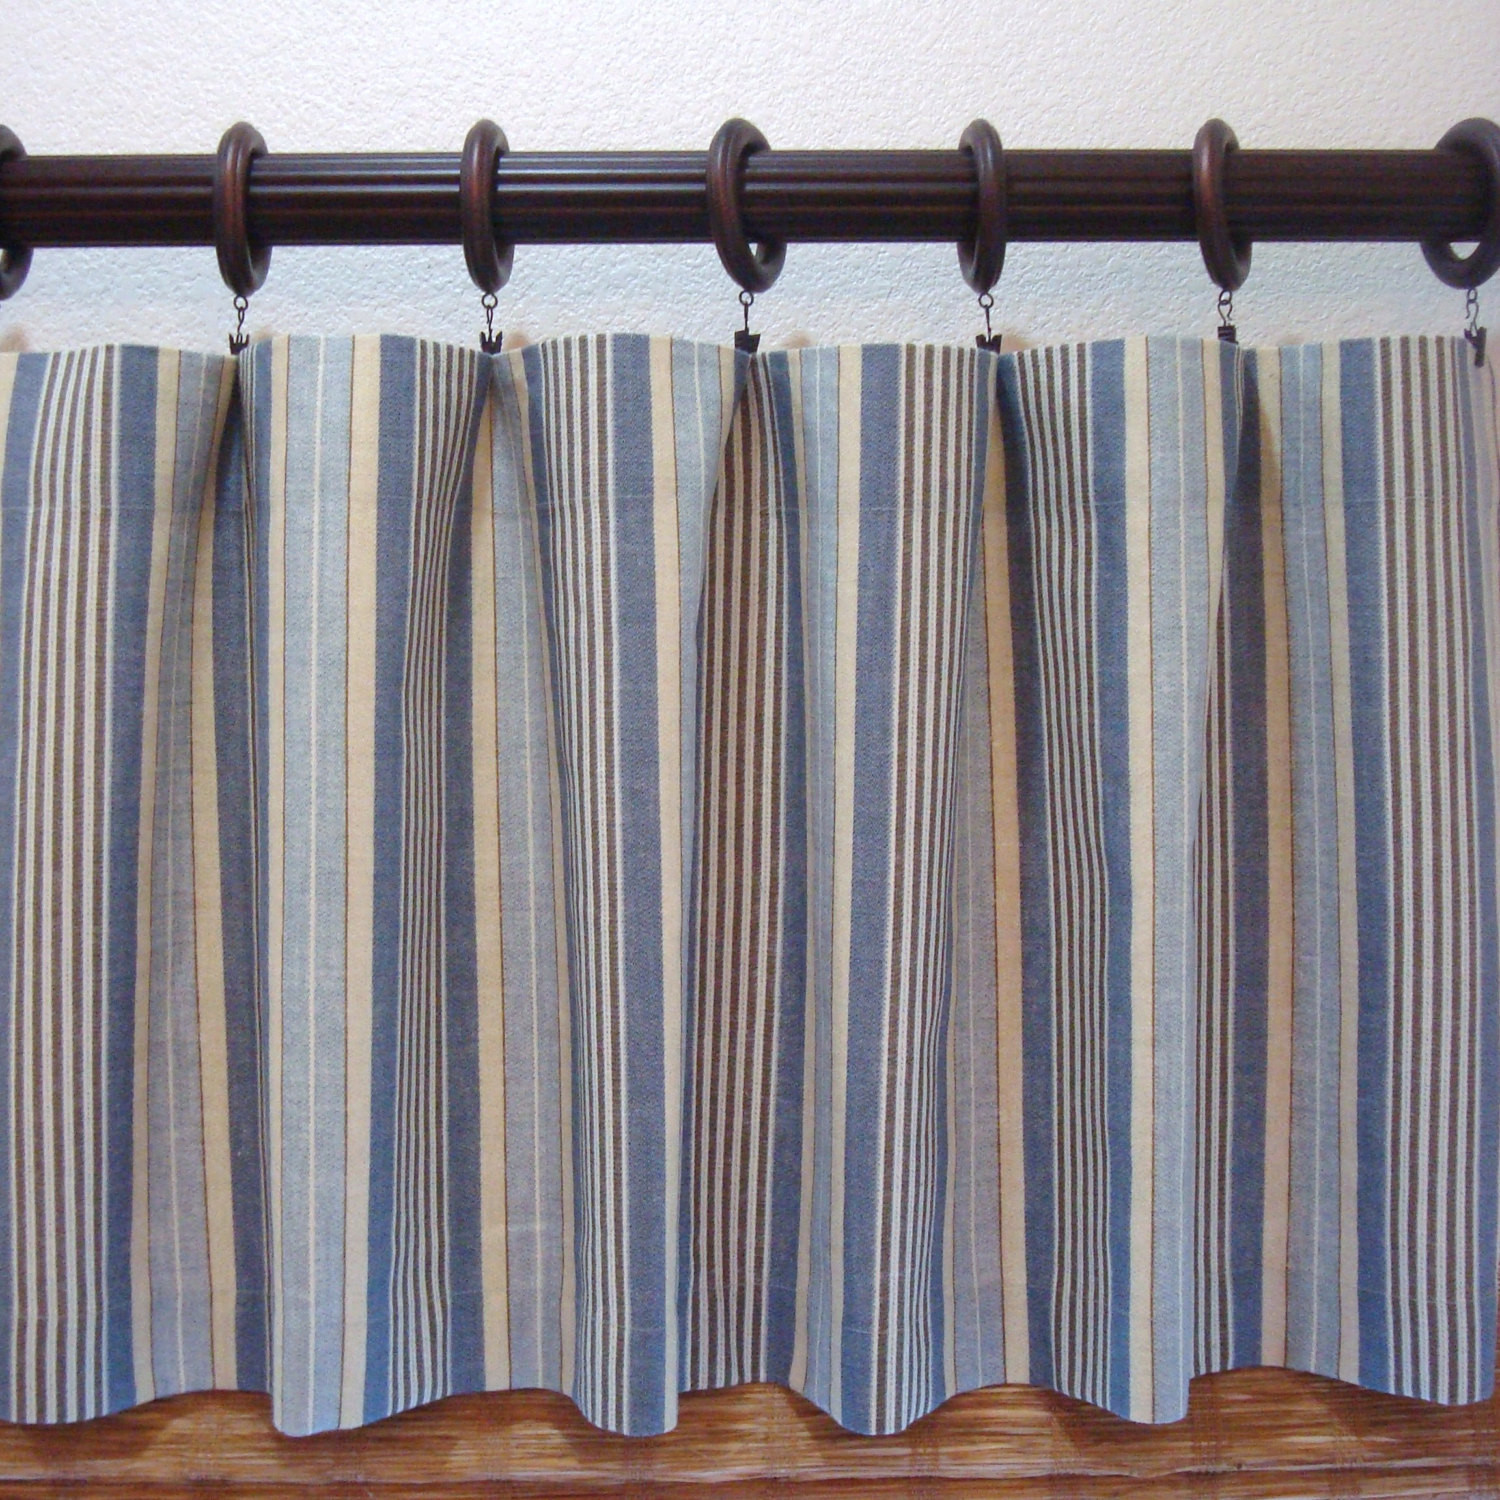 Blue And Yellow Kitchen Curtains
 Waverly Stripe Blue and Yellow Valance Kitchen Curtain Boys